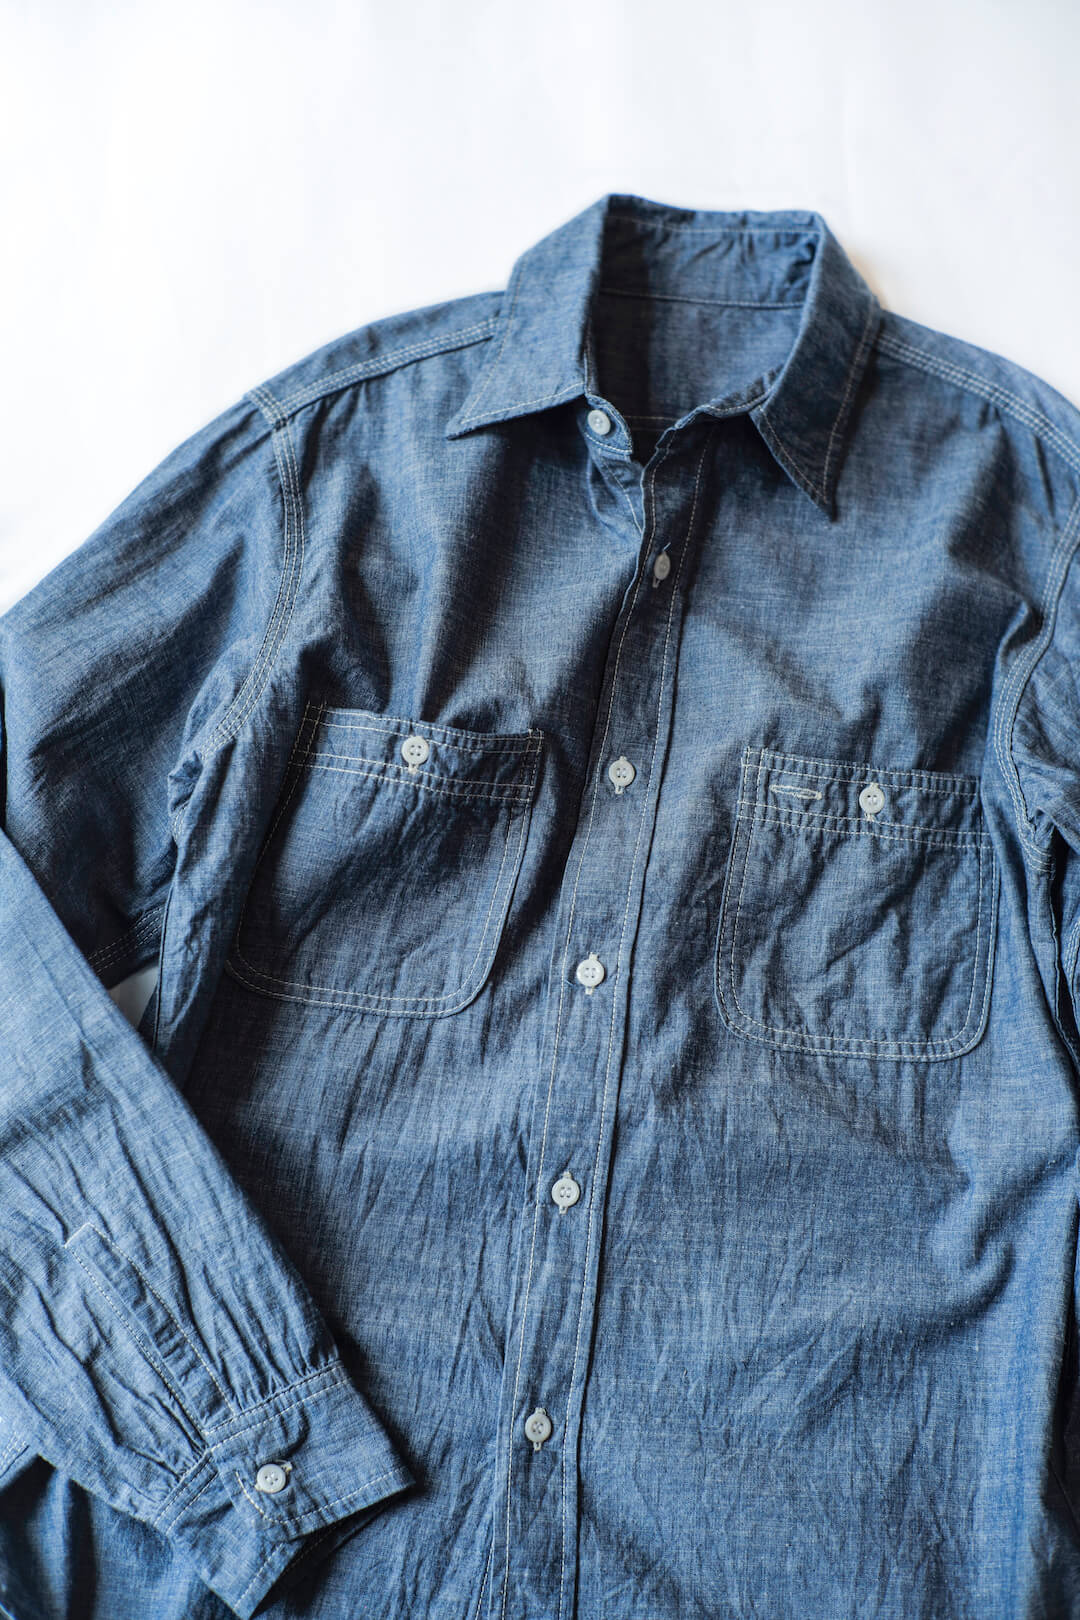 MSG & SONS CHAMBRAY SHIRT – MADE IN USA | ARCH アーチ - Sapporo ...